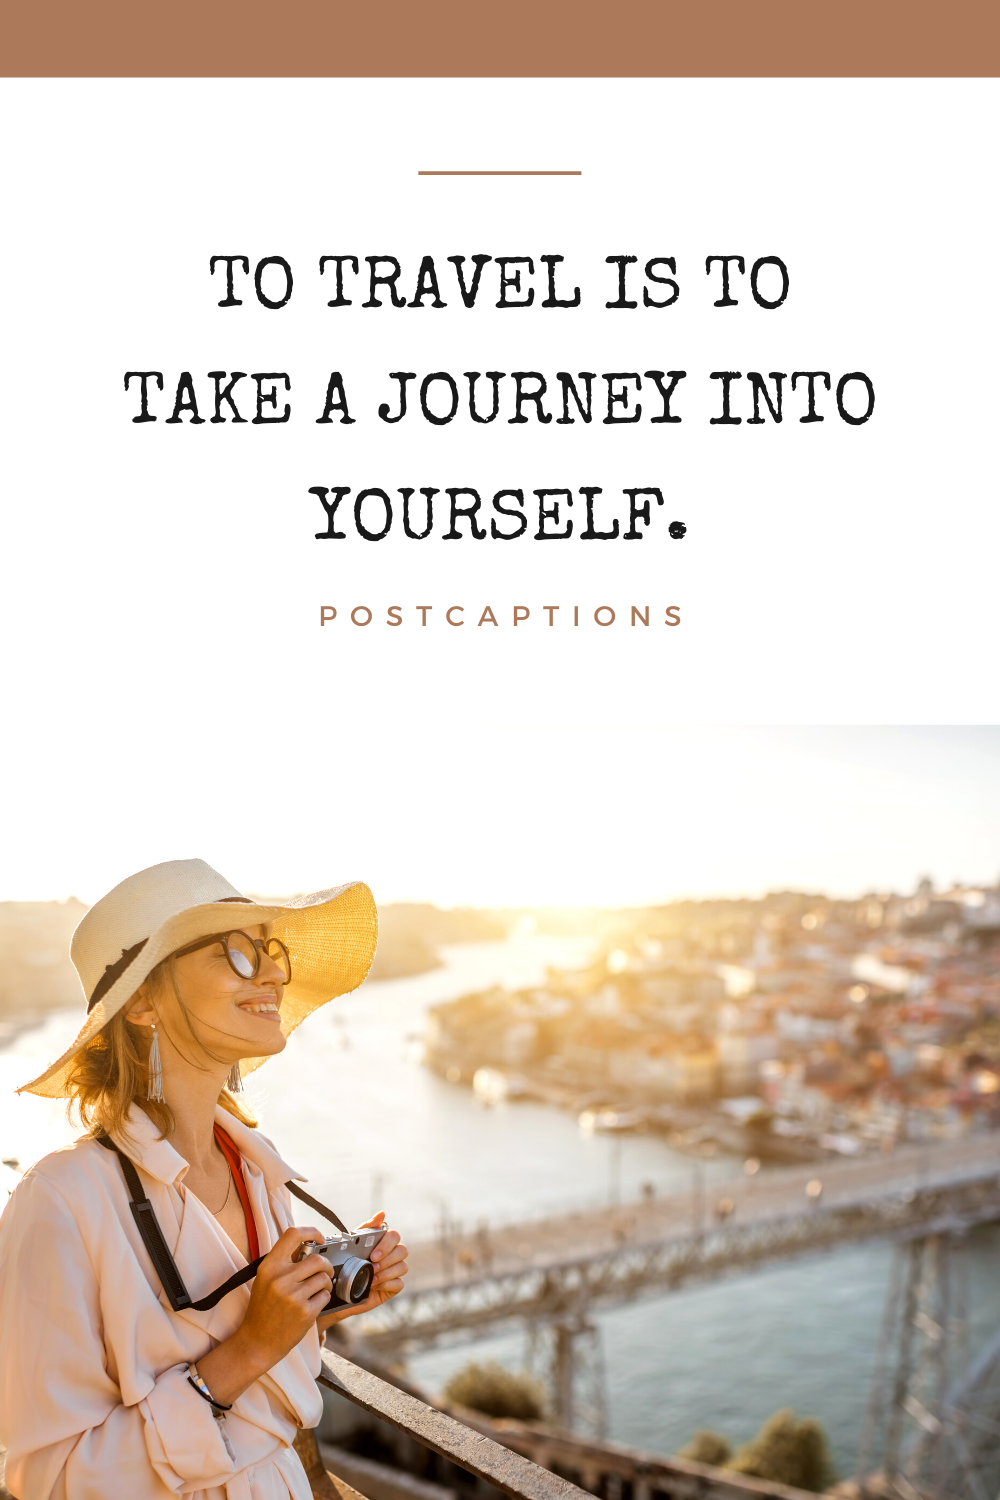 Captions about travel